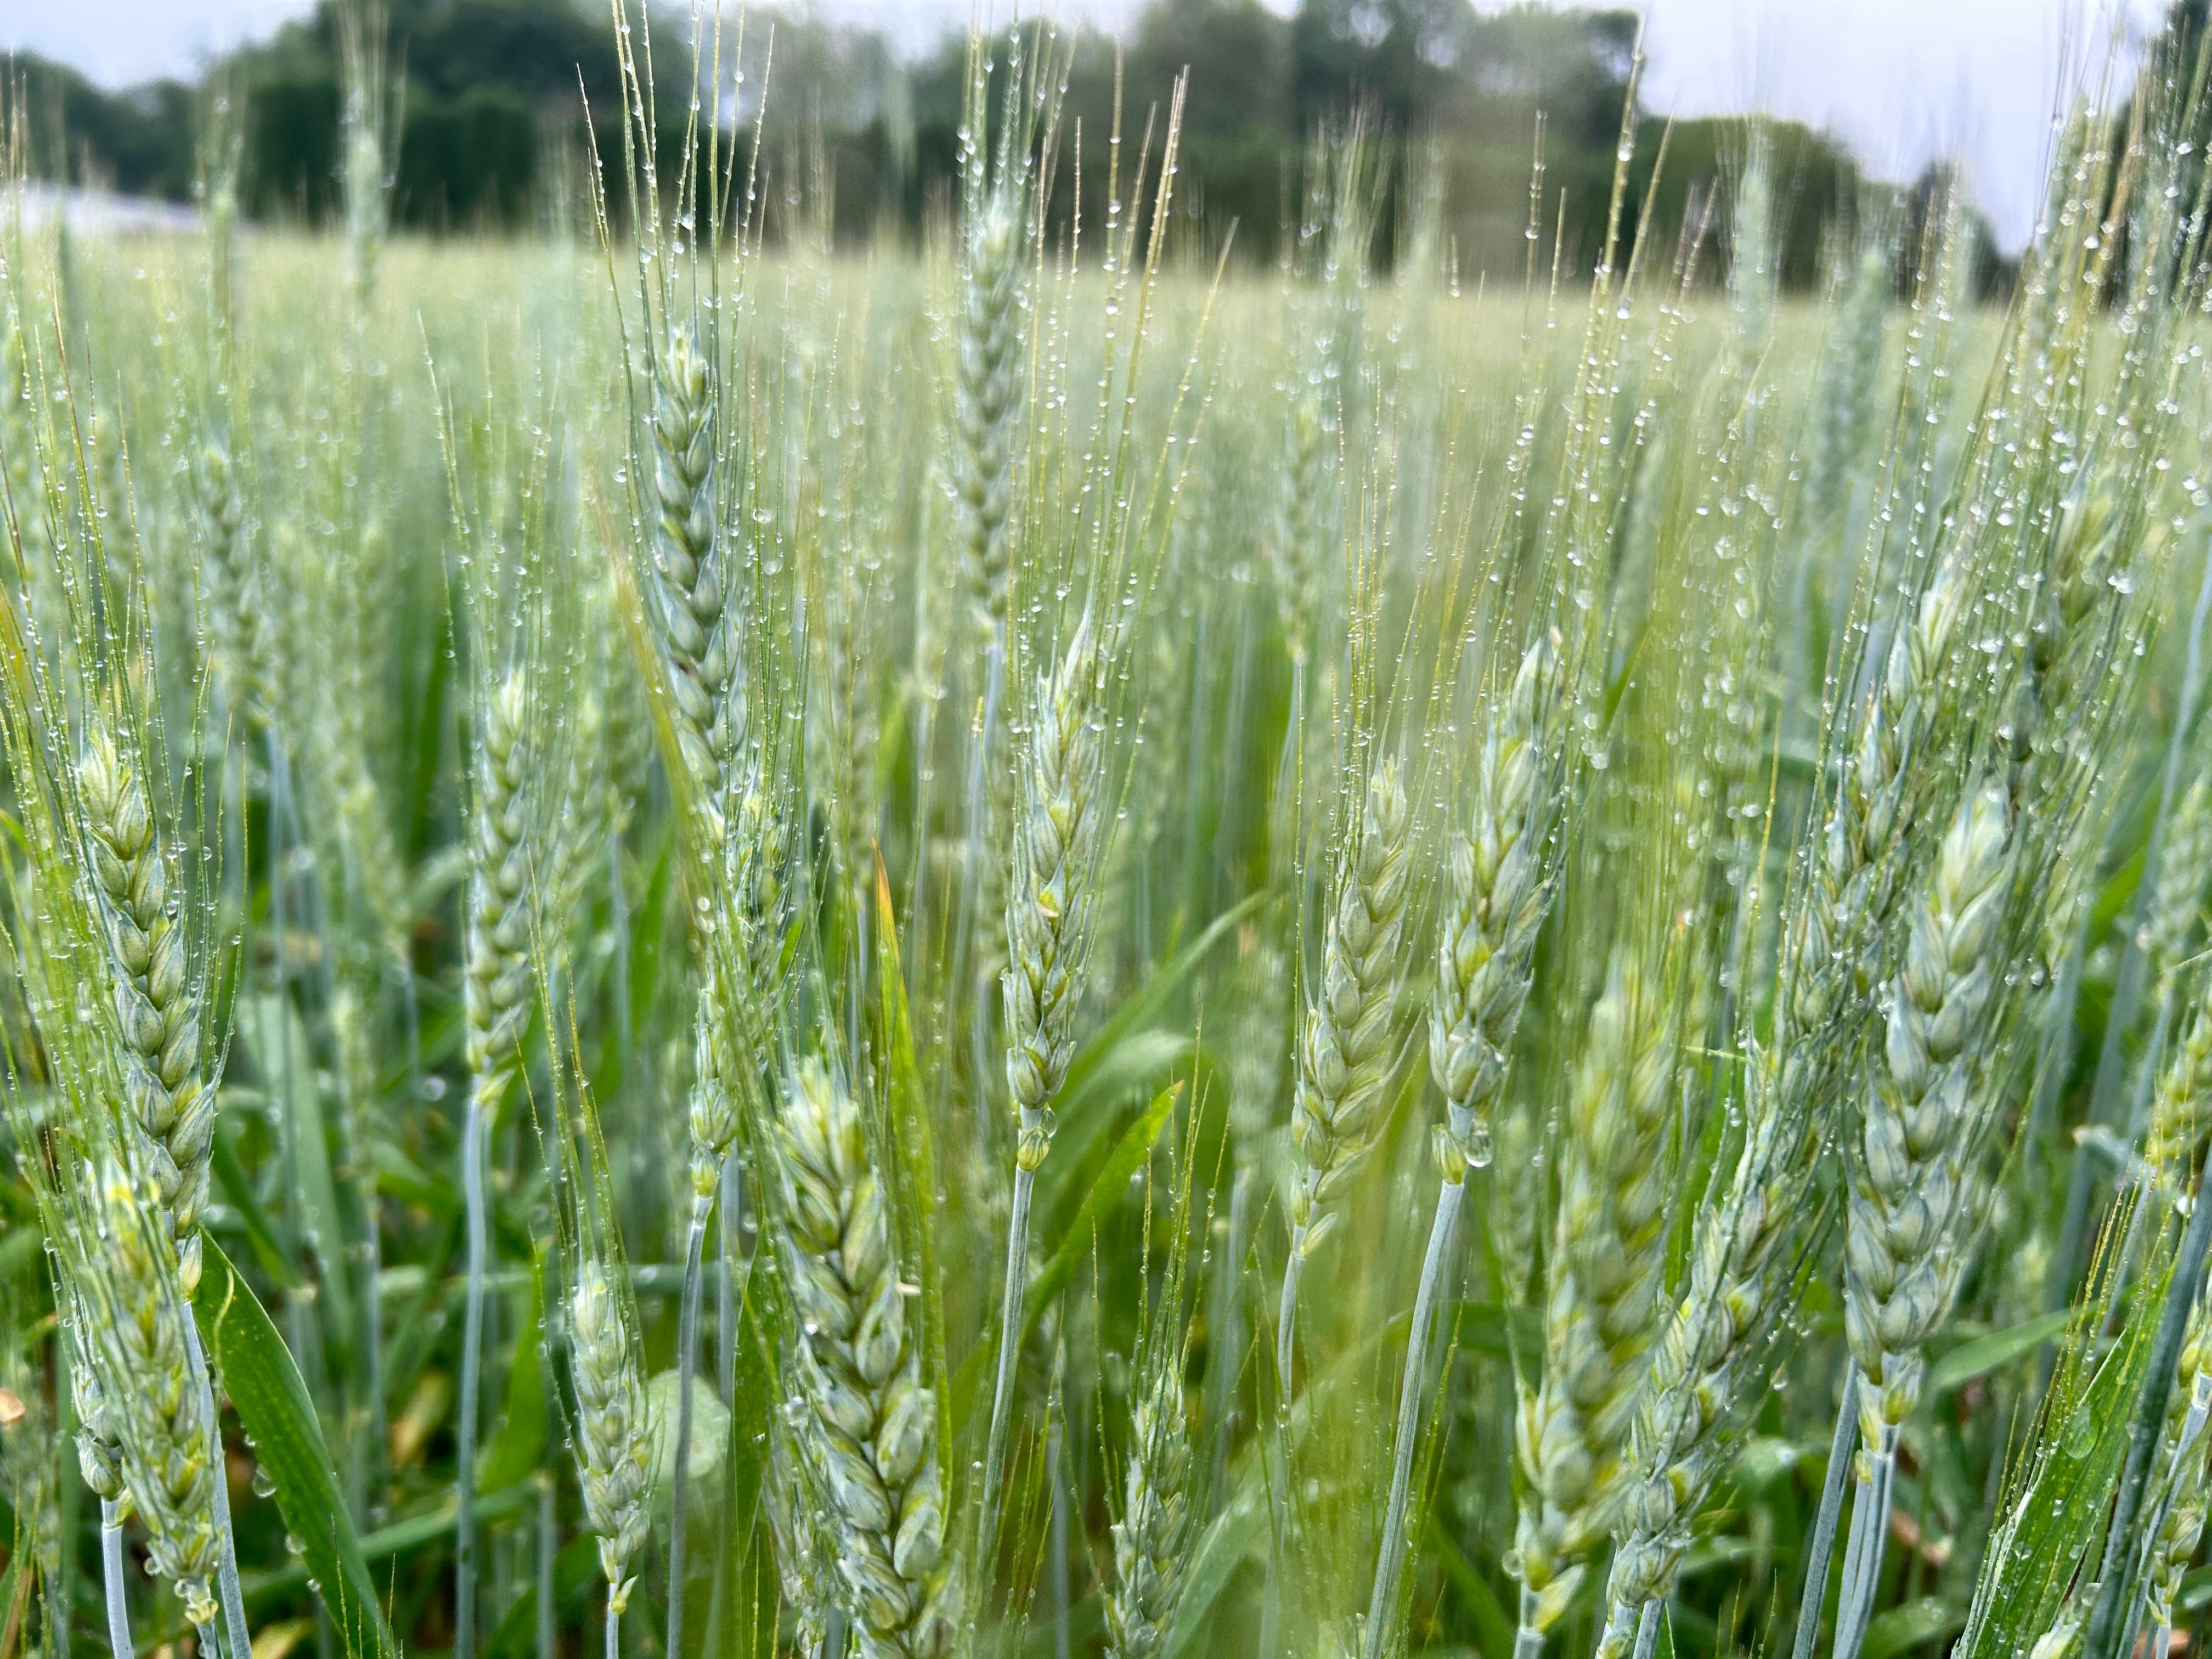 Closeup of wheat growing in a field.